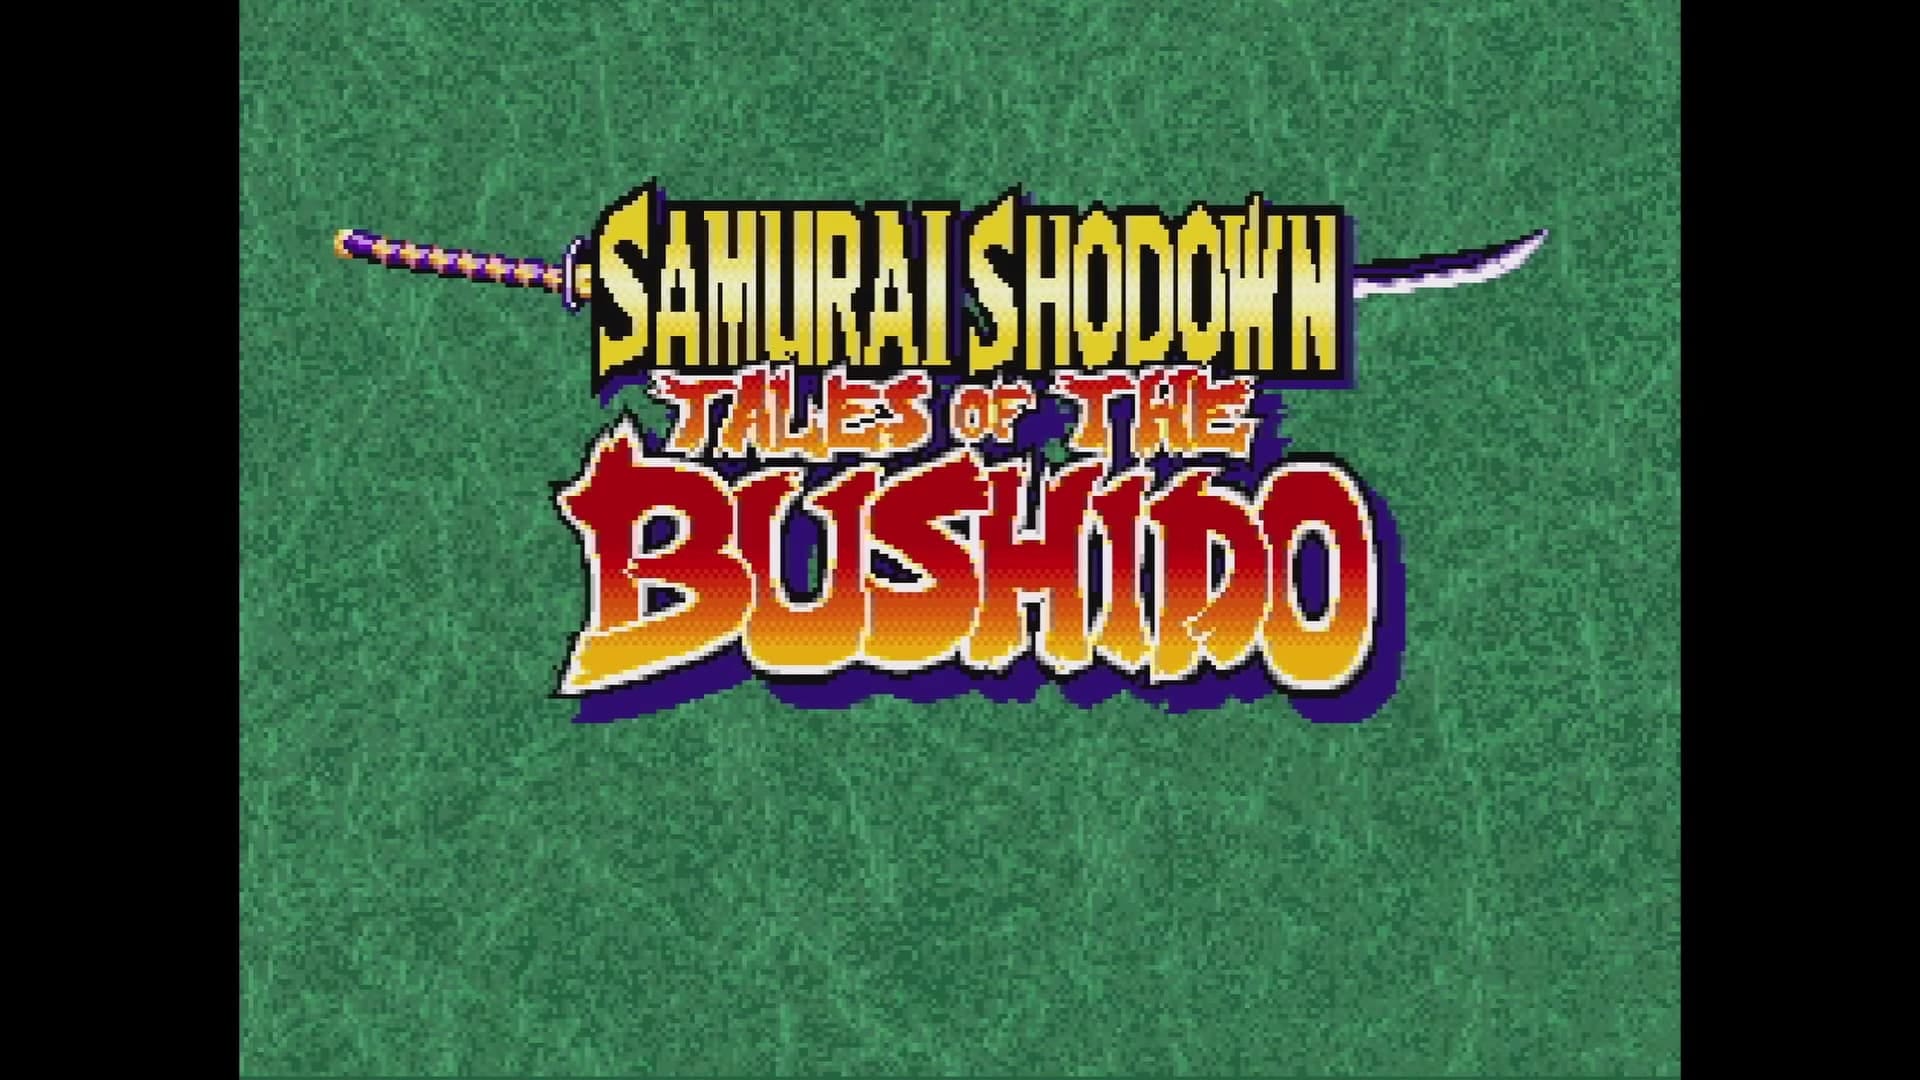 Image was taken from the YouTube video created by Video Game Esoterica, screenshot of the title screen for the Samurai Shodown RPG